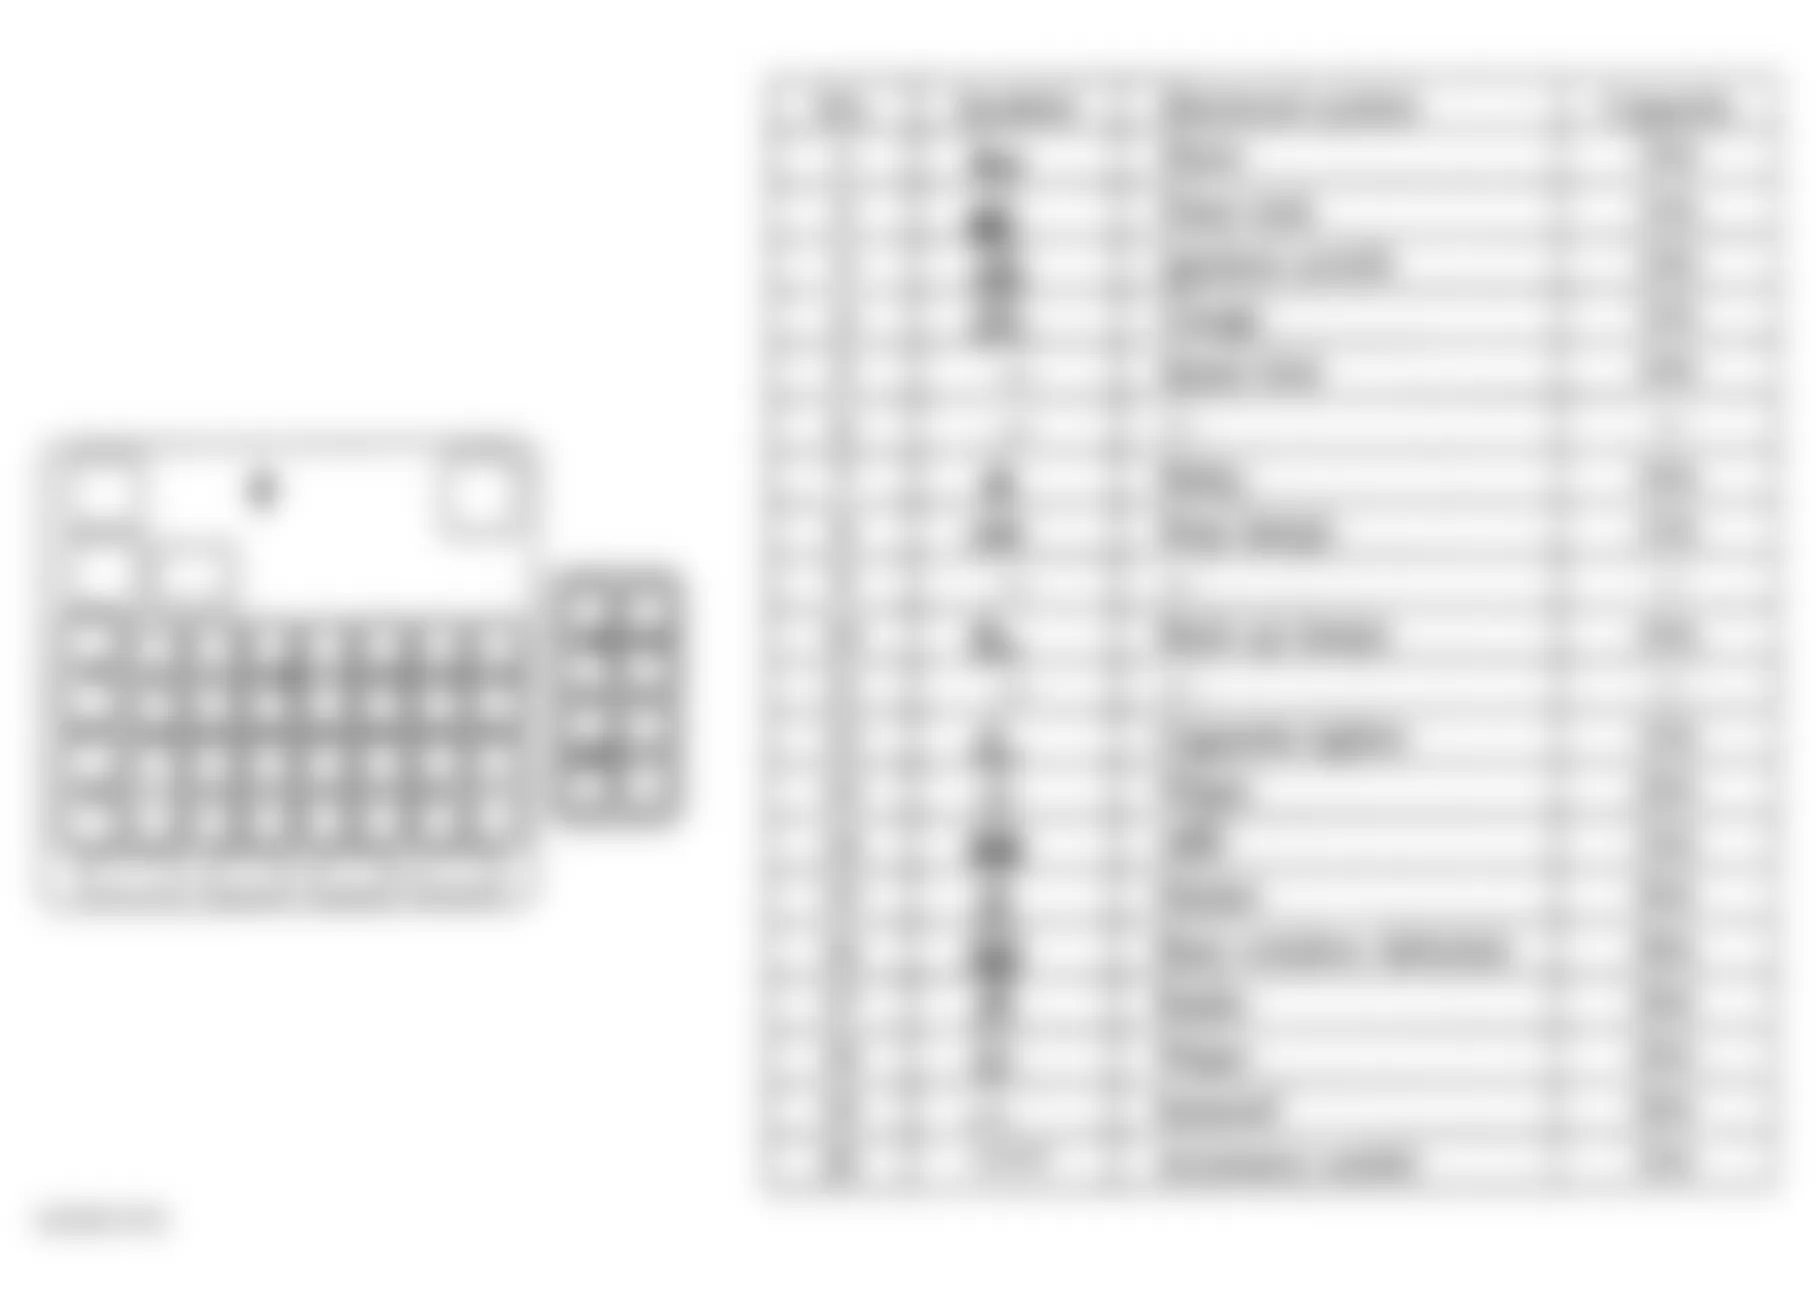 Chrysler Sebring LXi 2002 - Component Locations -  Passenger Compartment Fuse Block Legend (From Owners Manual)